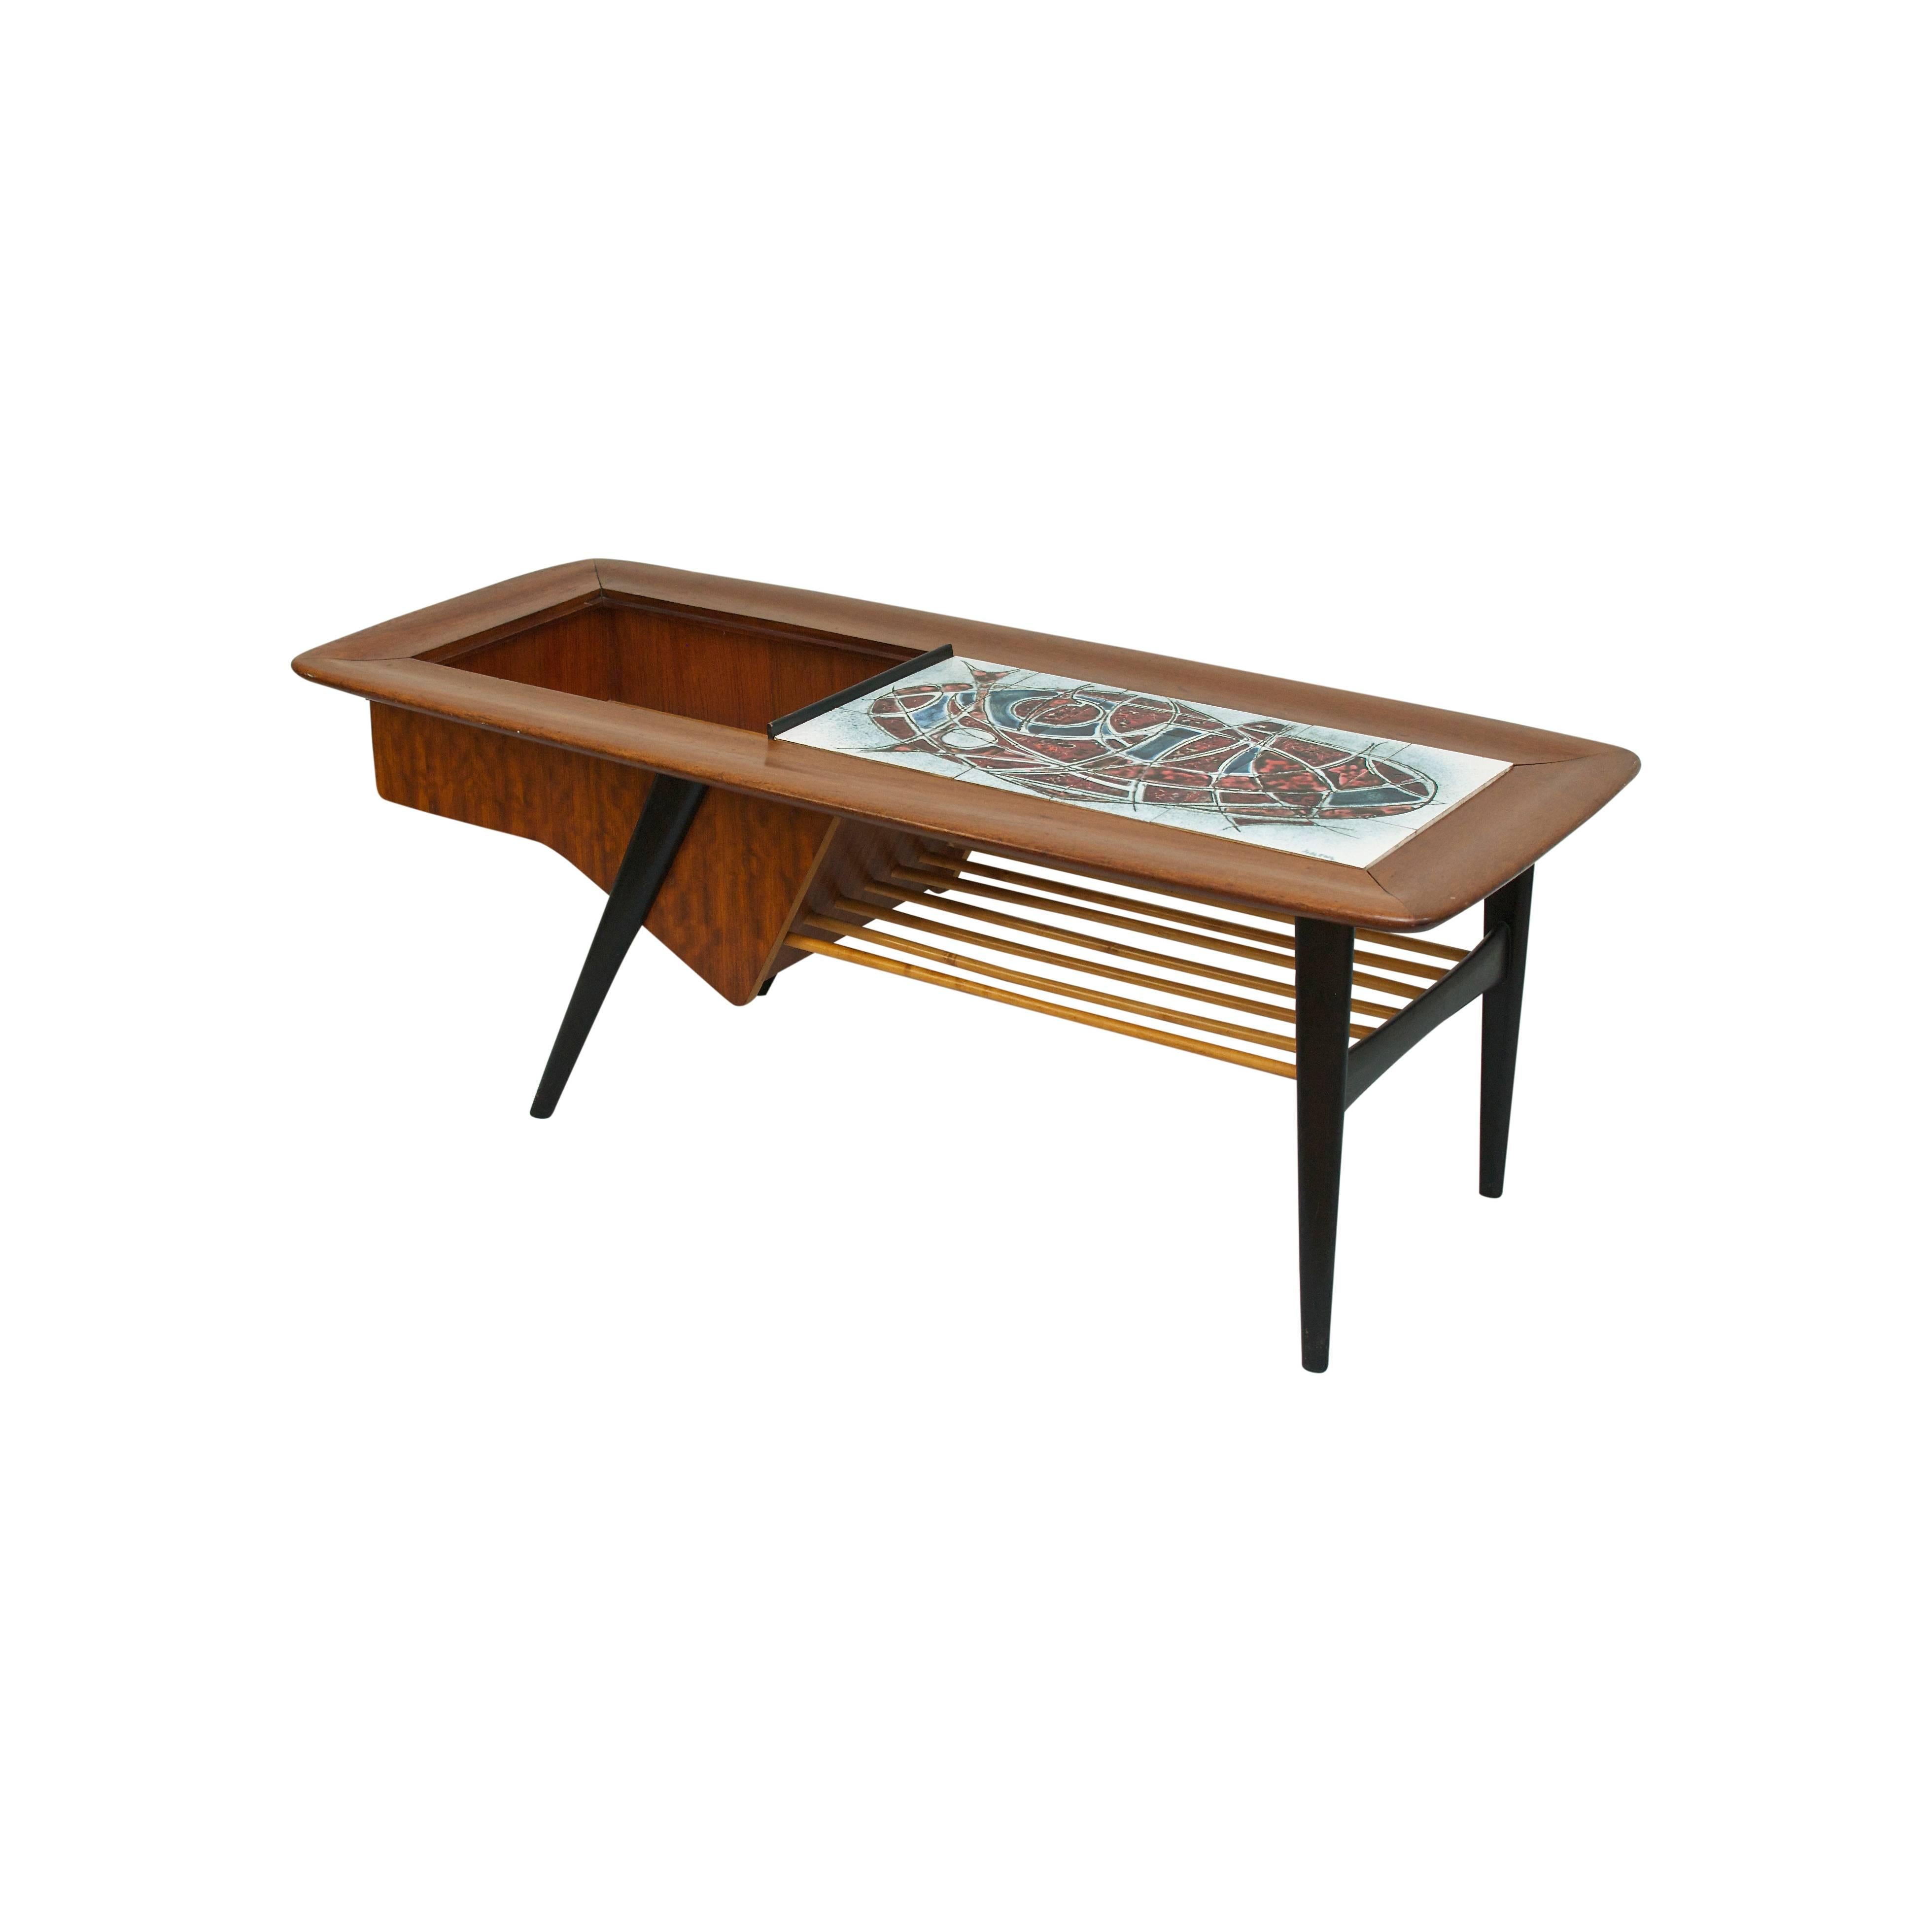 Alfred Hendrickx coffee table with sliding tray with ceramic tiles by Artist signed Nielens for Belform Belgium 1950s. Base in stained beech top in lacquered mahogany, cage in mahogany veneer.  